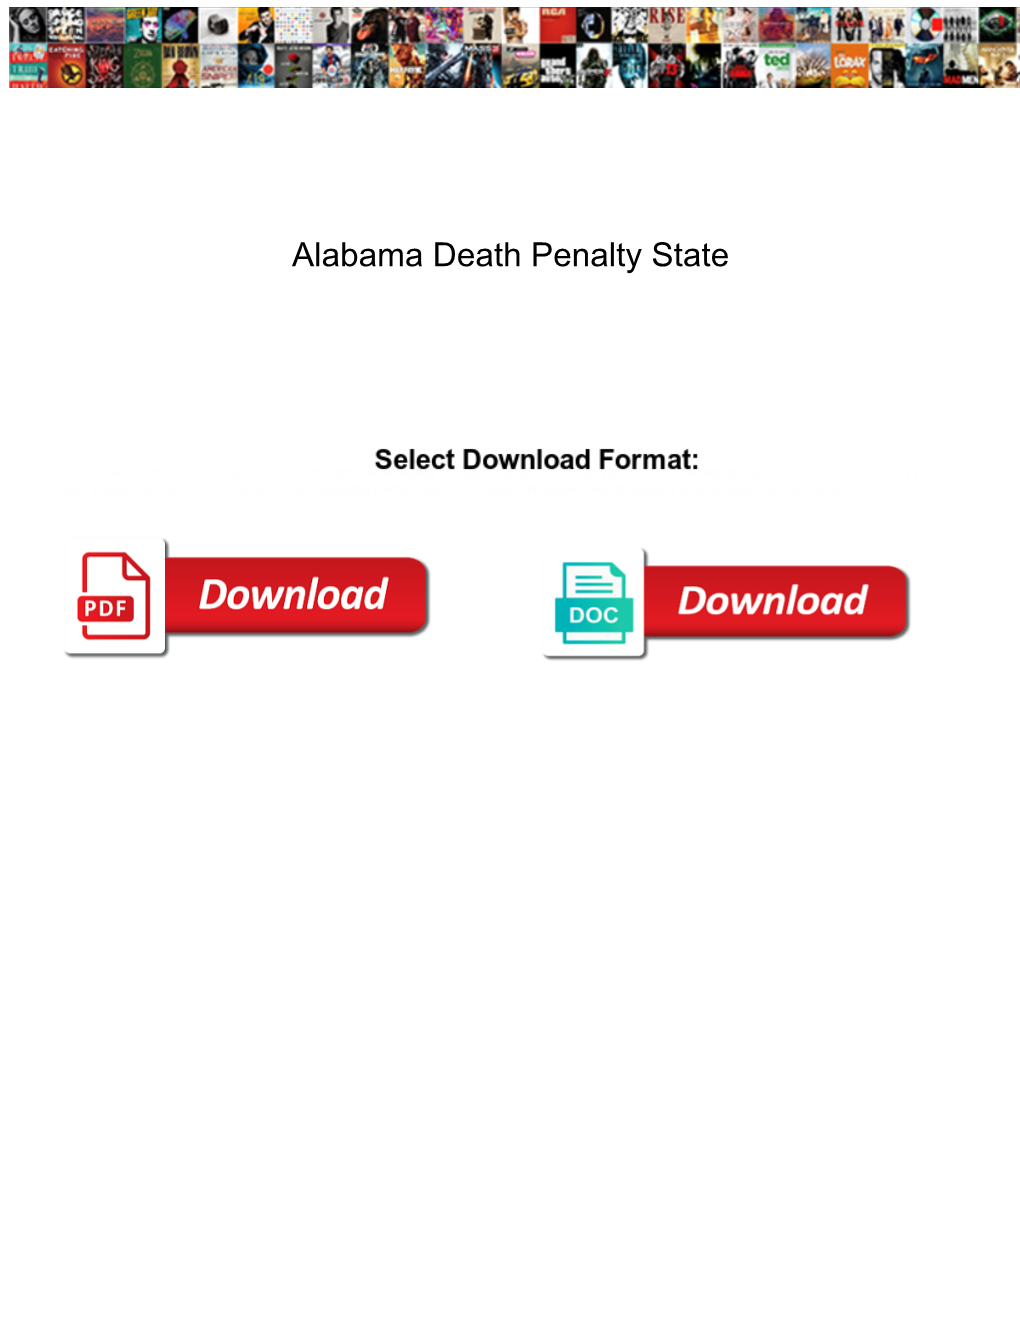 Alabama Death Penalty State